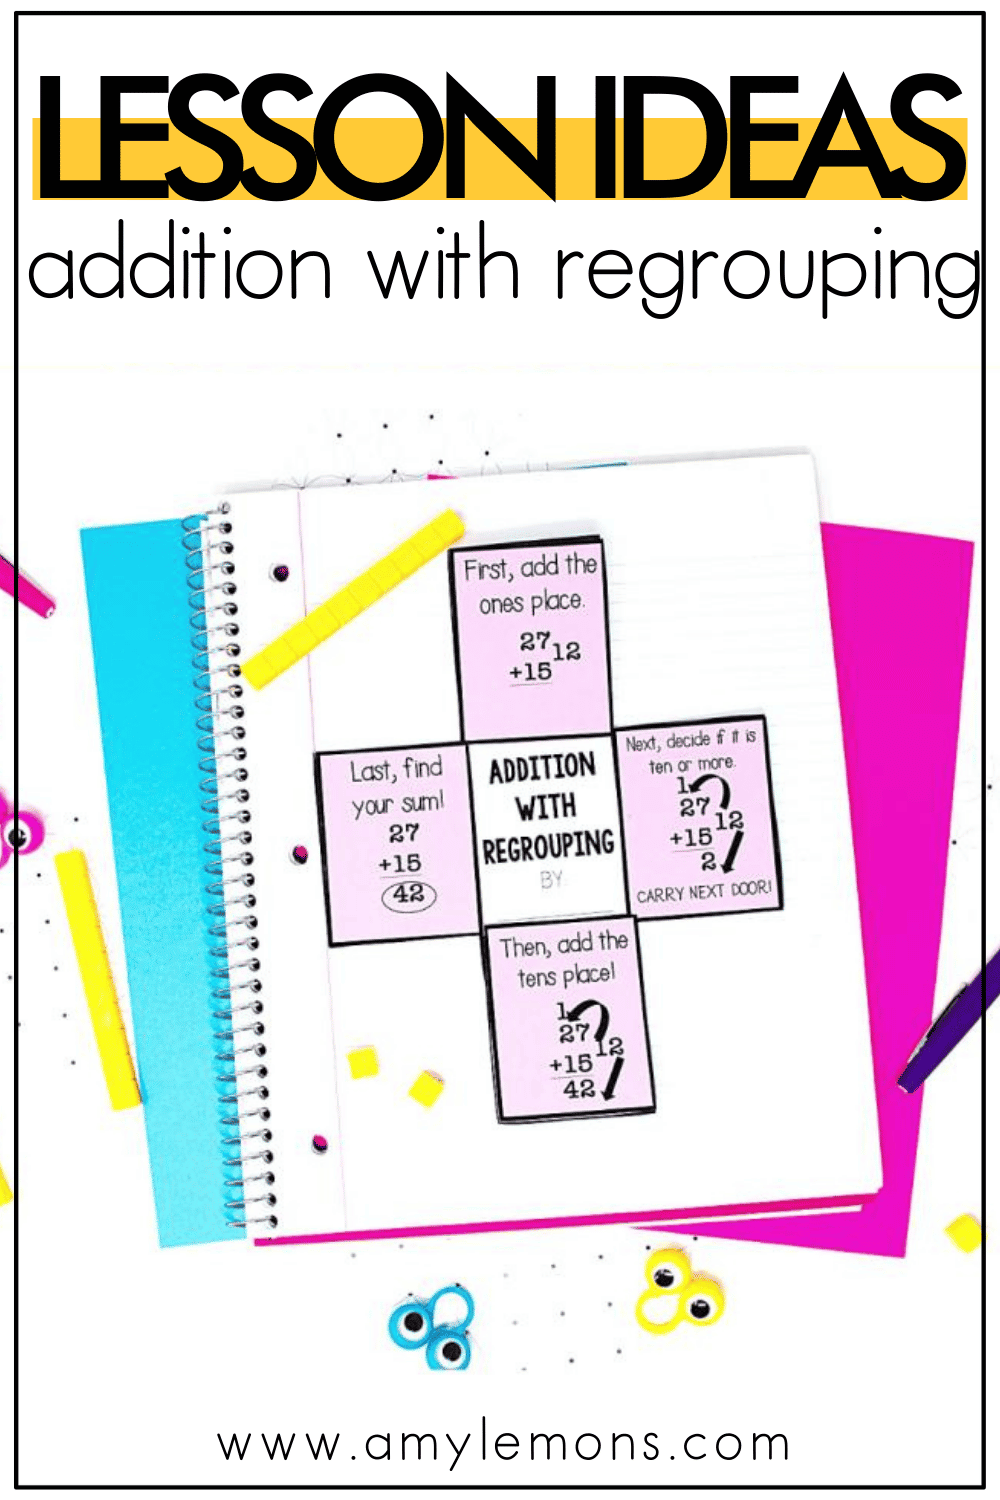 addition-with-regrouping-tips-and-tricks-amy-lemons